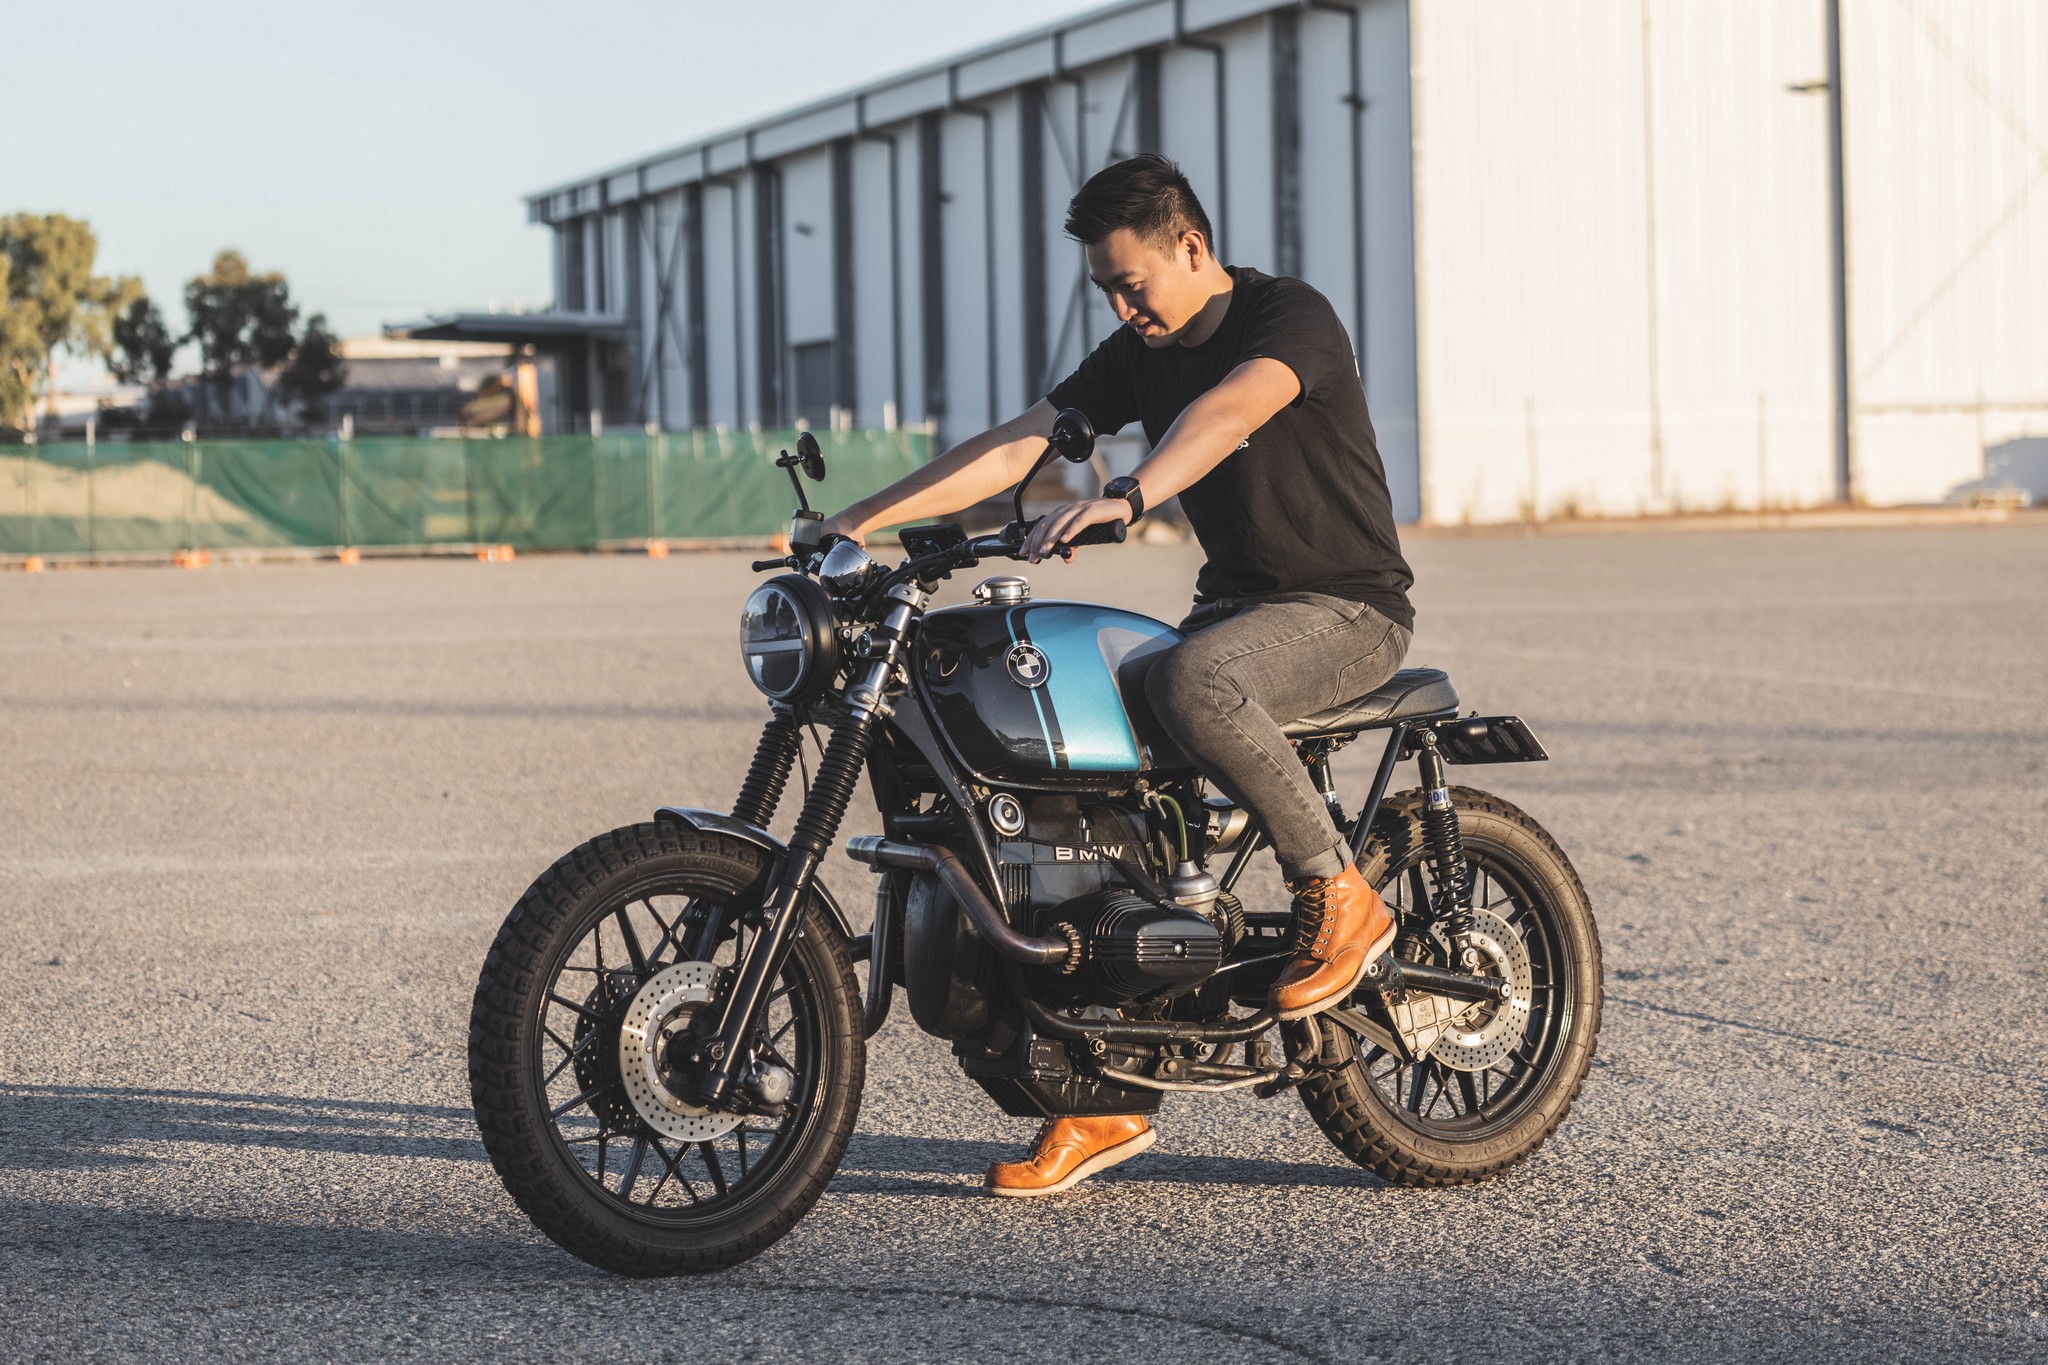 BMW Street Scrambler with man and shed